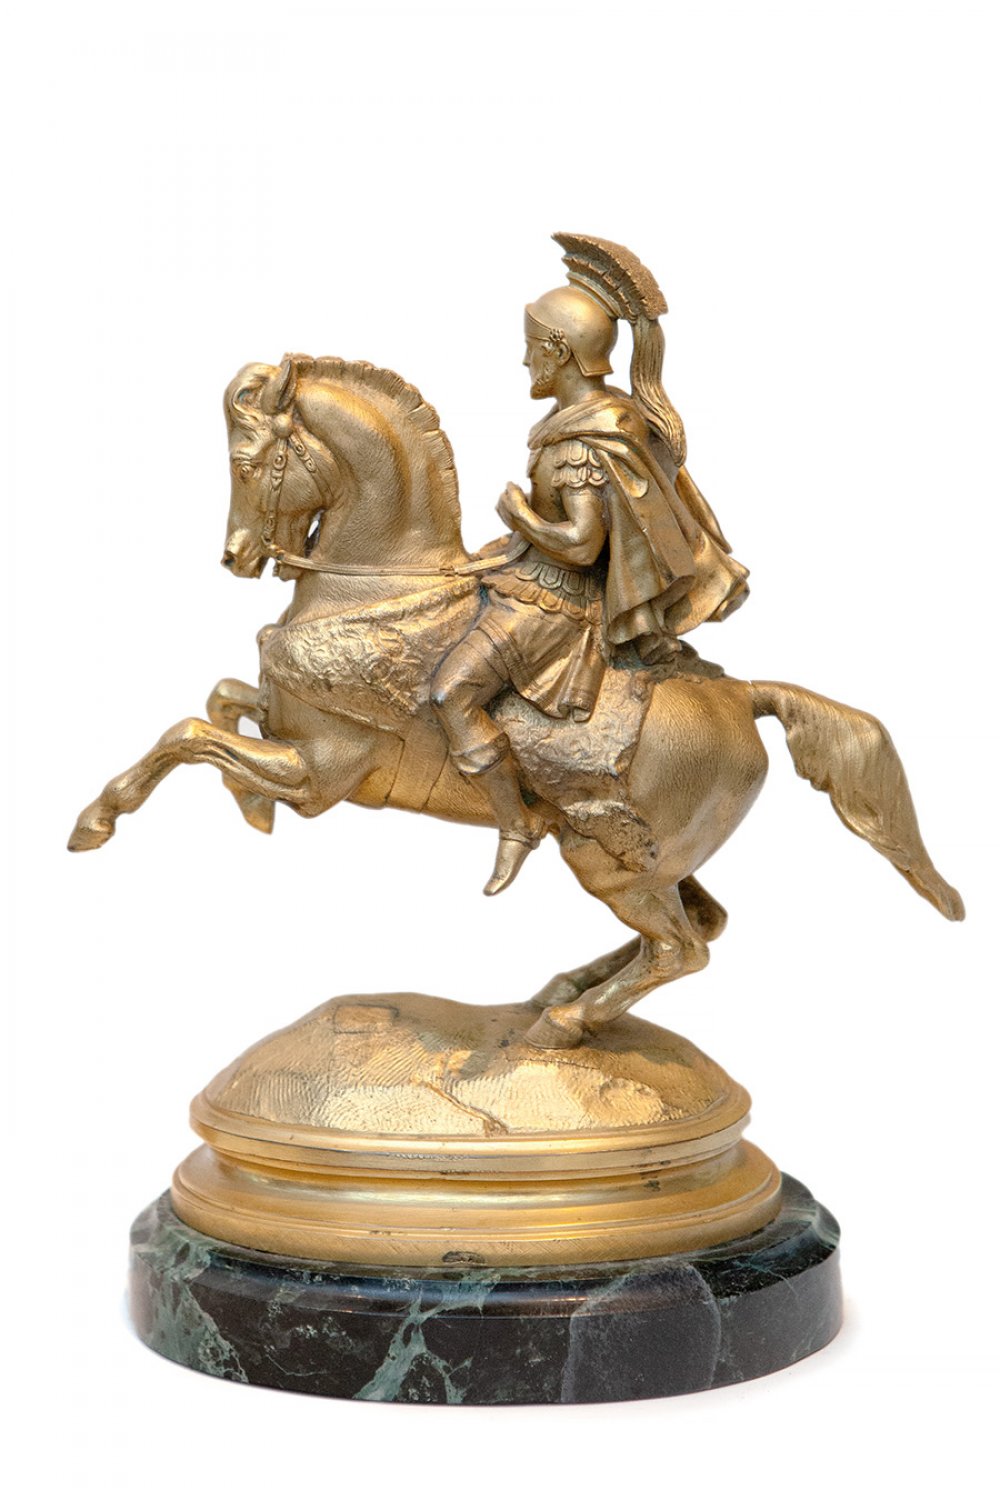 Equestrian sculpture, late 19th century.Gilded bronze.Signed by A. Leveel.Size: 22 x 20 x 9 cm; 24 x